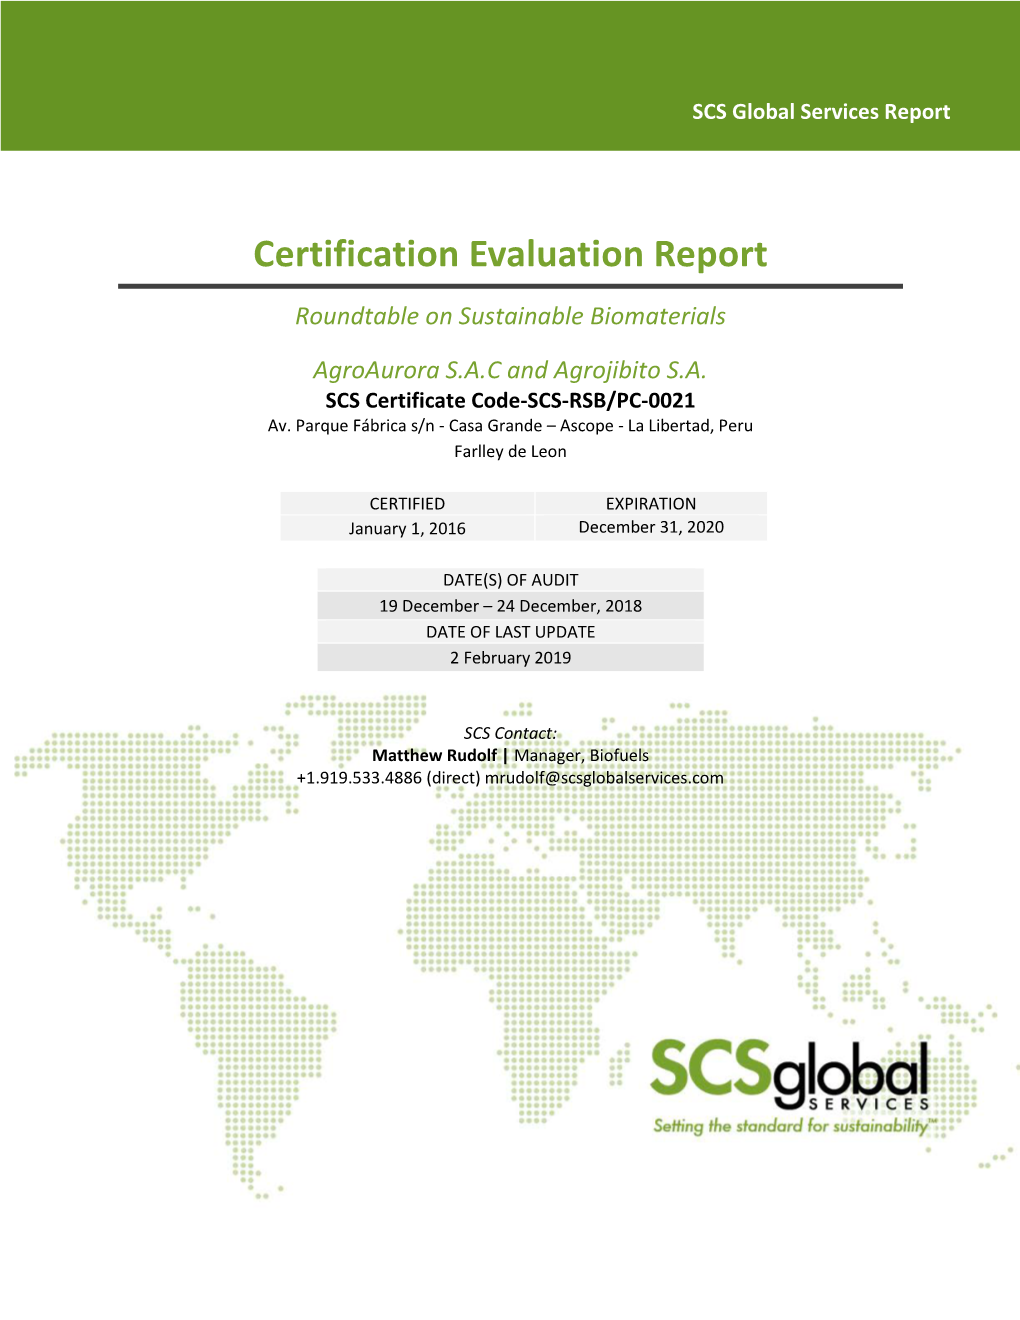 Certification Evaluation Report Roundtable on Sustainable Biomaterials